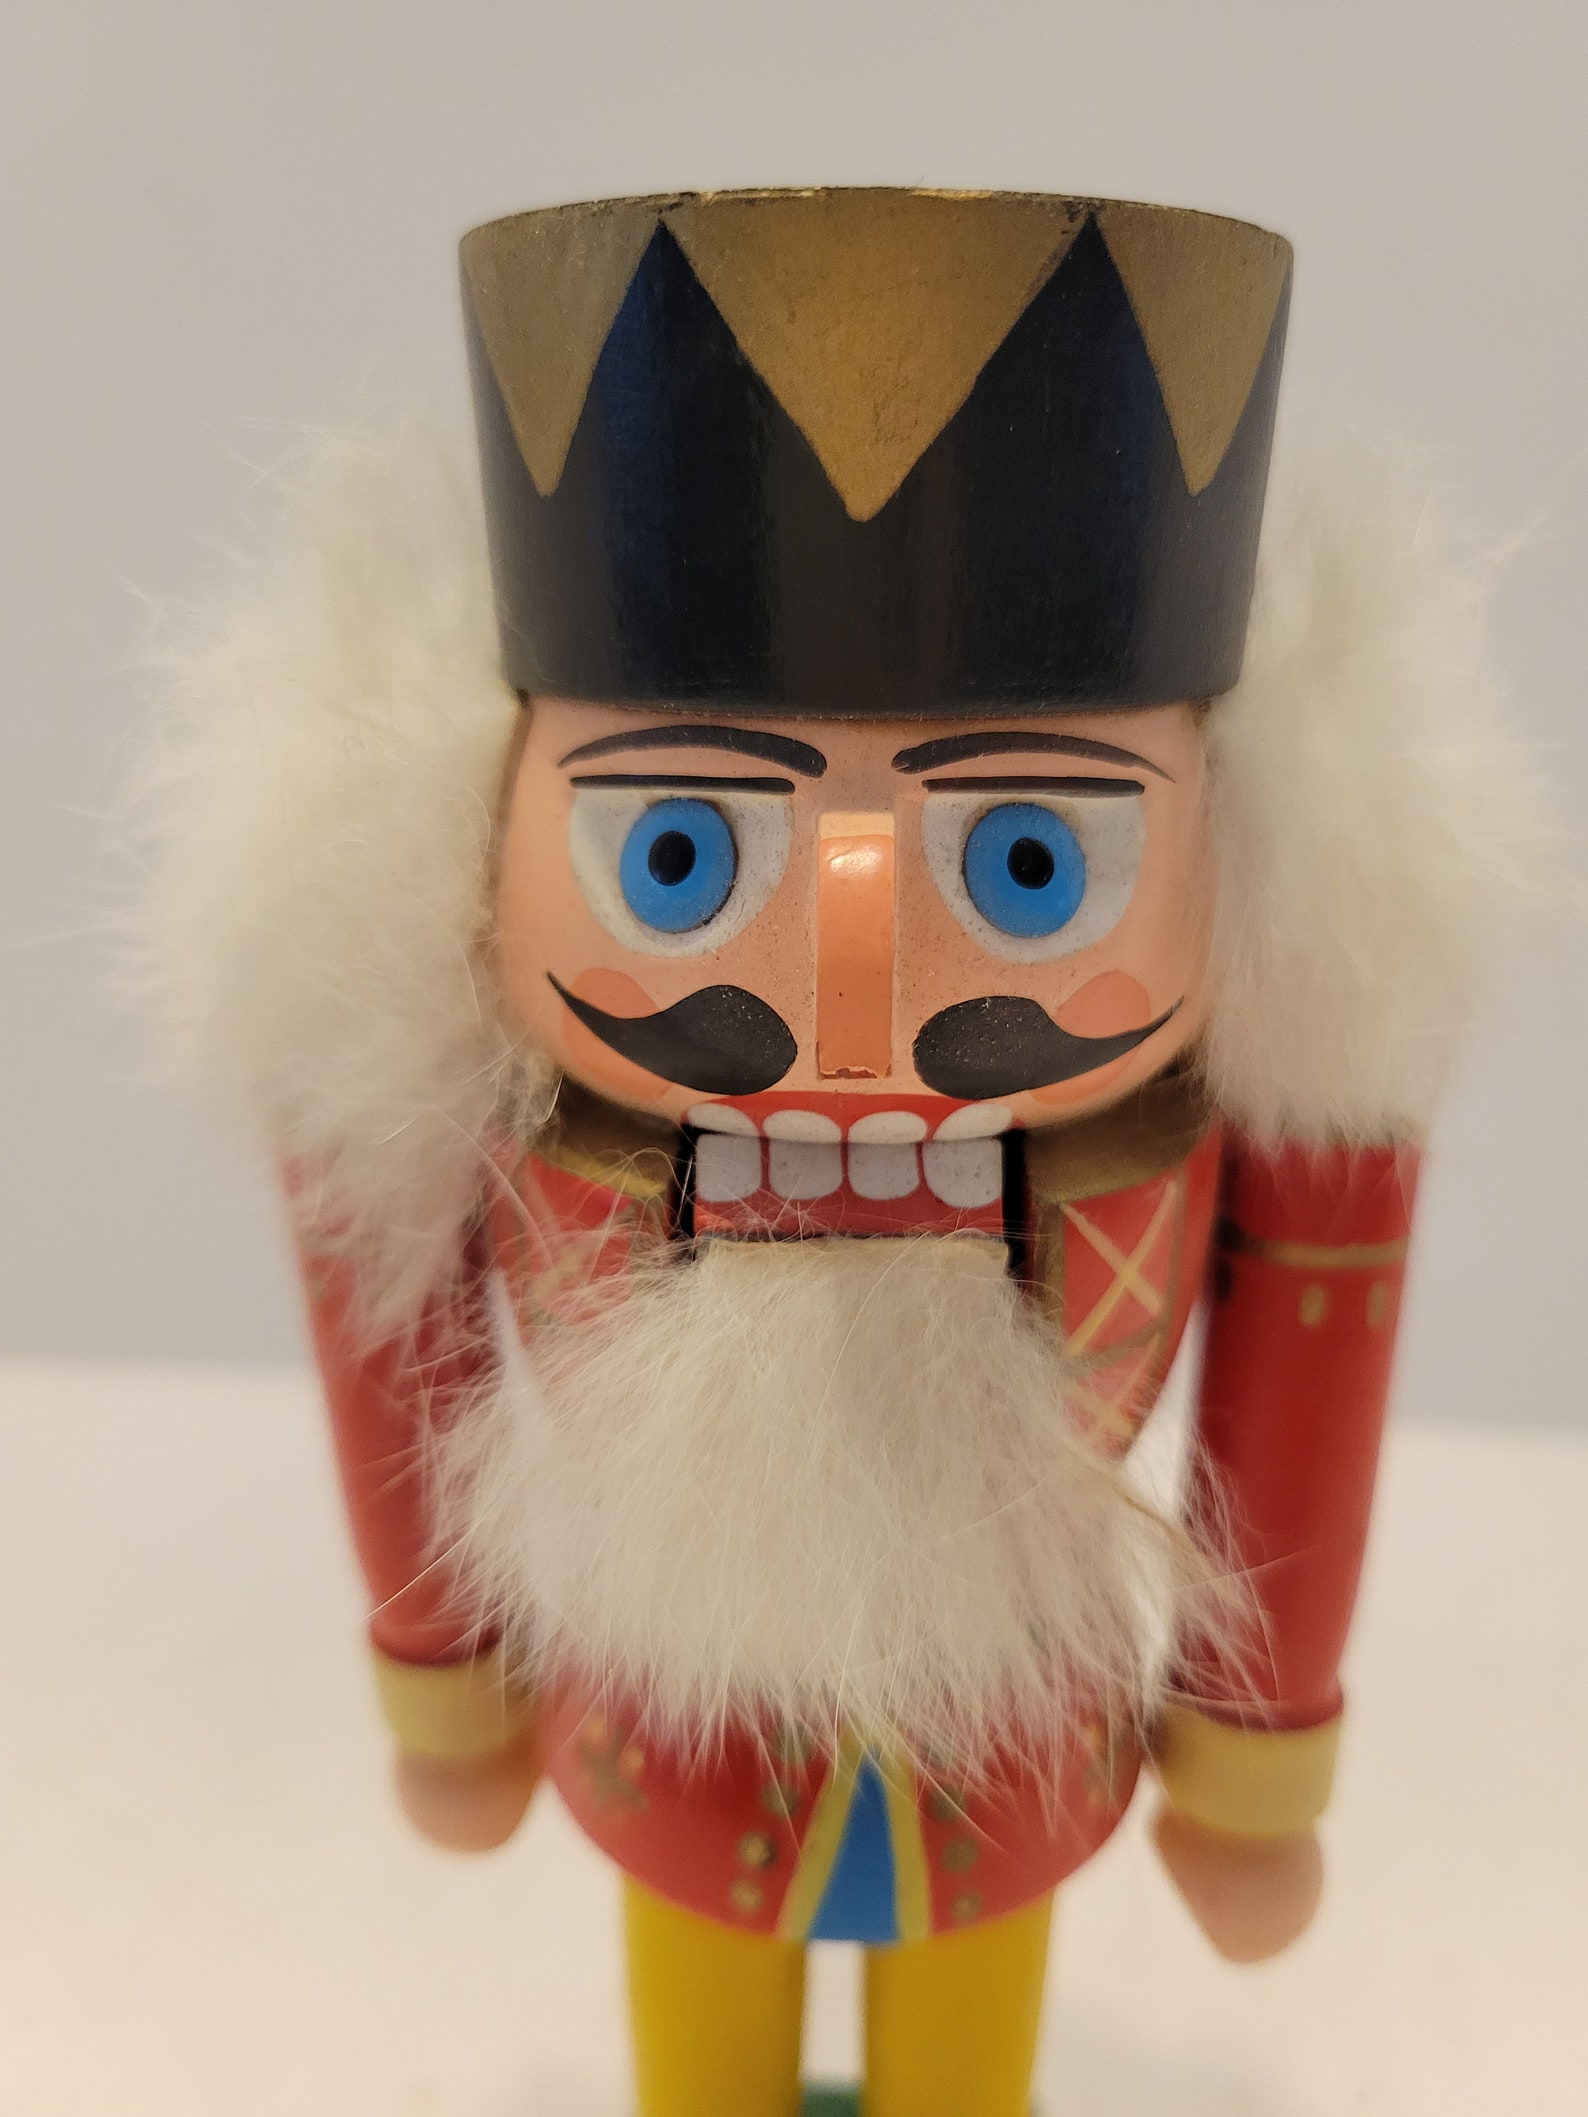 intage Erzgebirge King Soldier * Made in Germany * KWO Old World Christmas * Holiday Nutcracker * 7 5/8 * Christmas